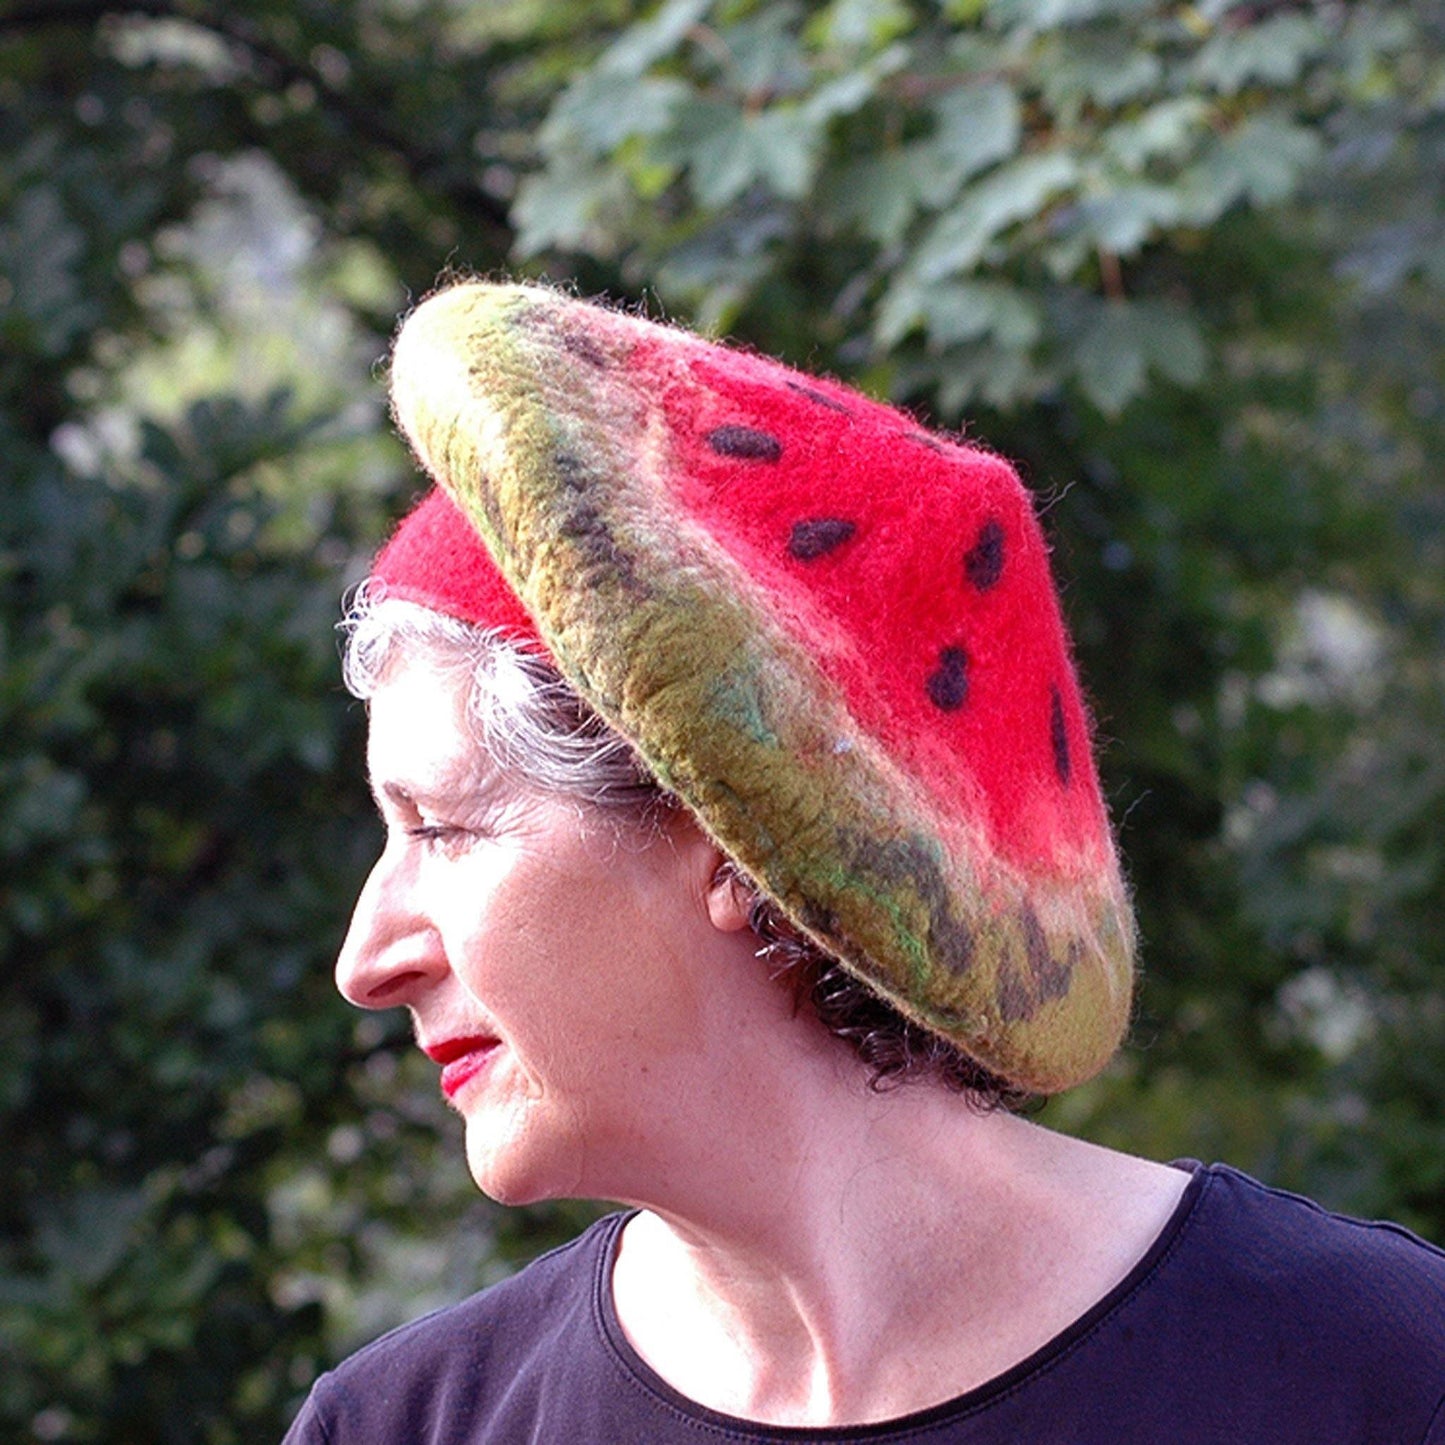 Whimsical Felted Watermelon Beret in Red and Green - side view